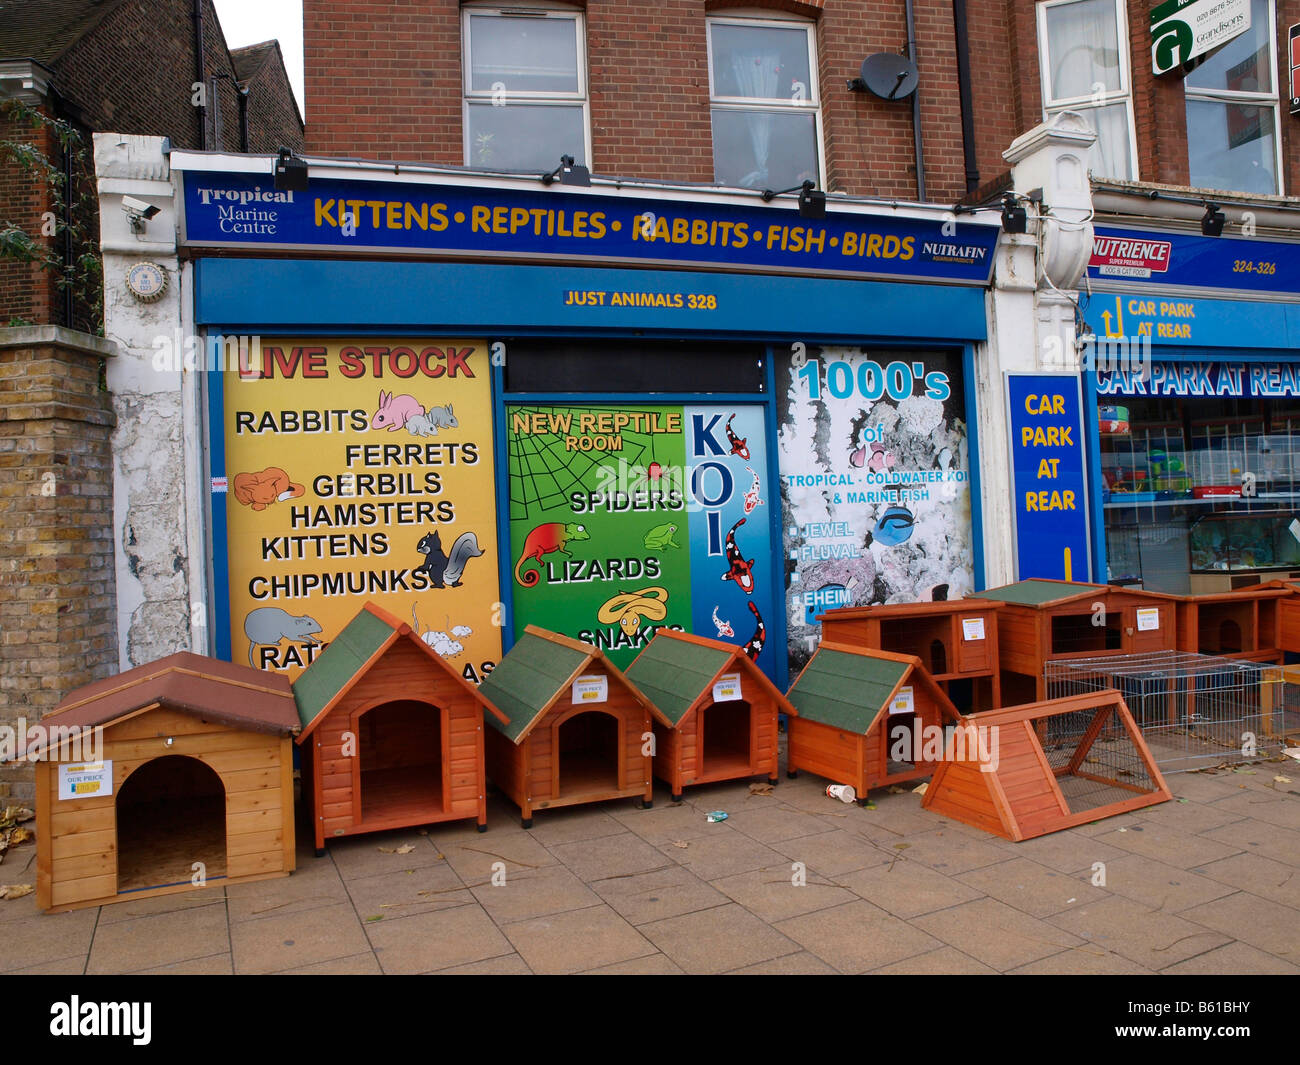 Kennels, Hutches, Cages and Runs Outside the Just Animals pet shop Lewisham High Street London England Stock Photo